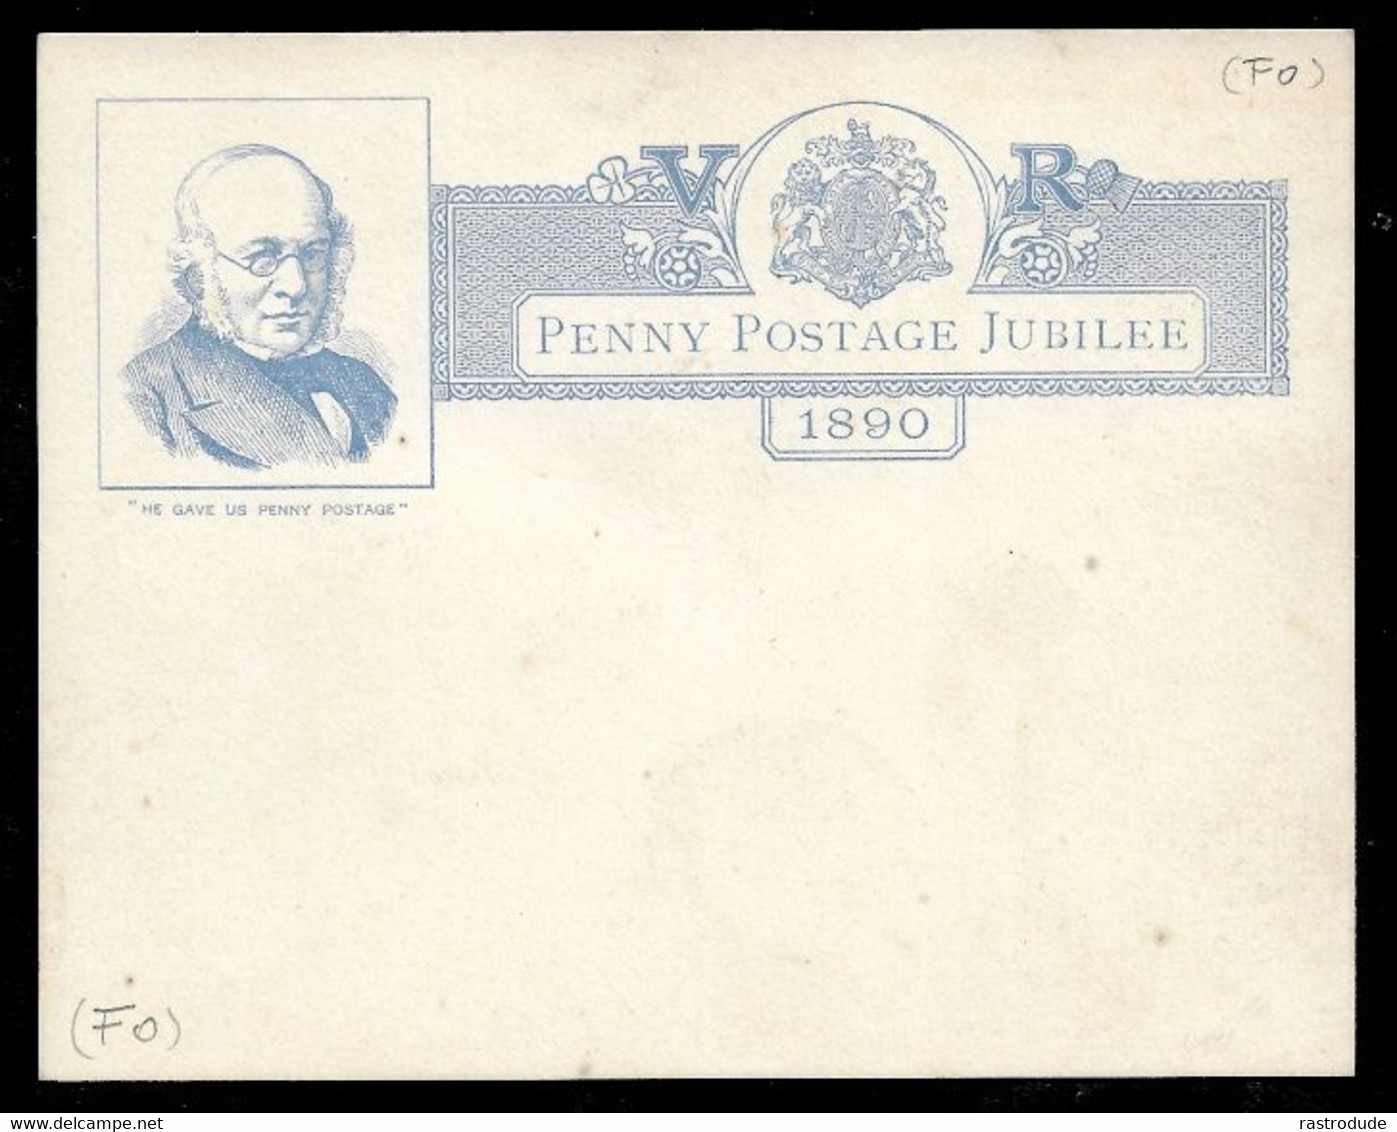 1890 VICTORIA - PENNY POSTAGE JUBILEE PC - SIR ROWLAND HILL  - UNUSED - Postmark Collection